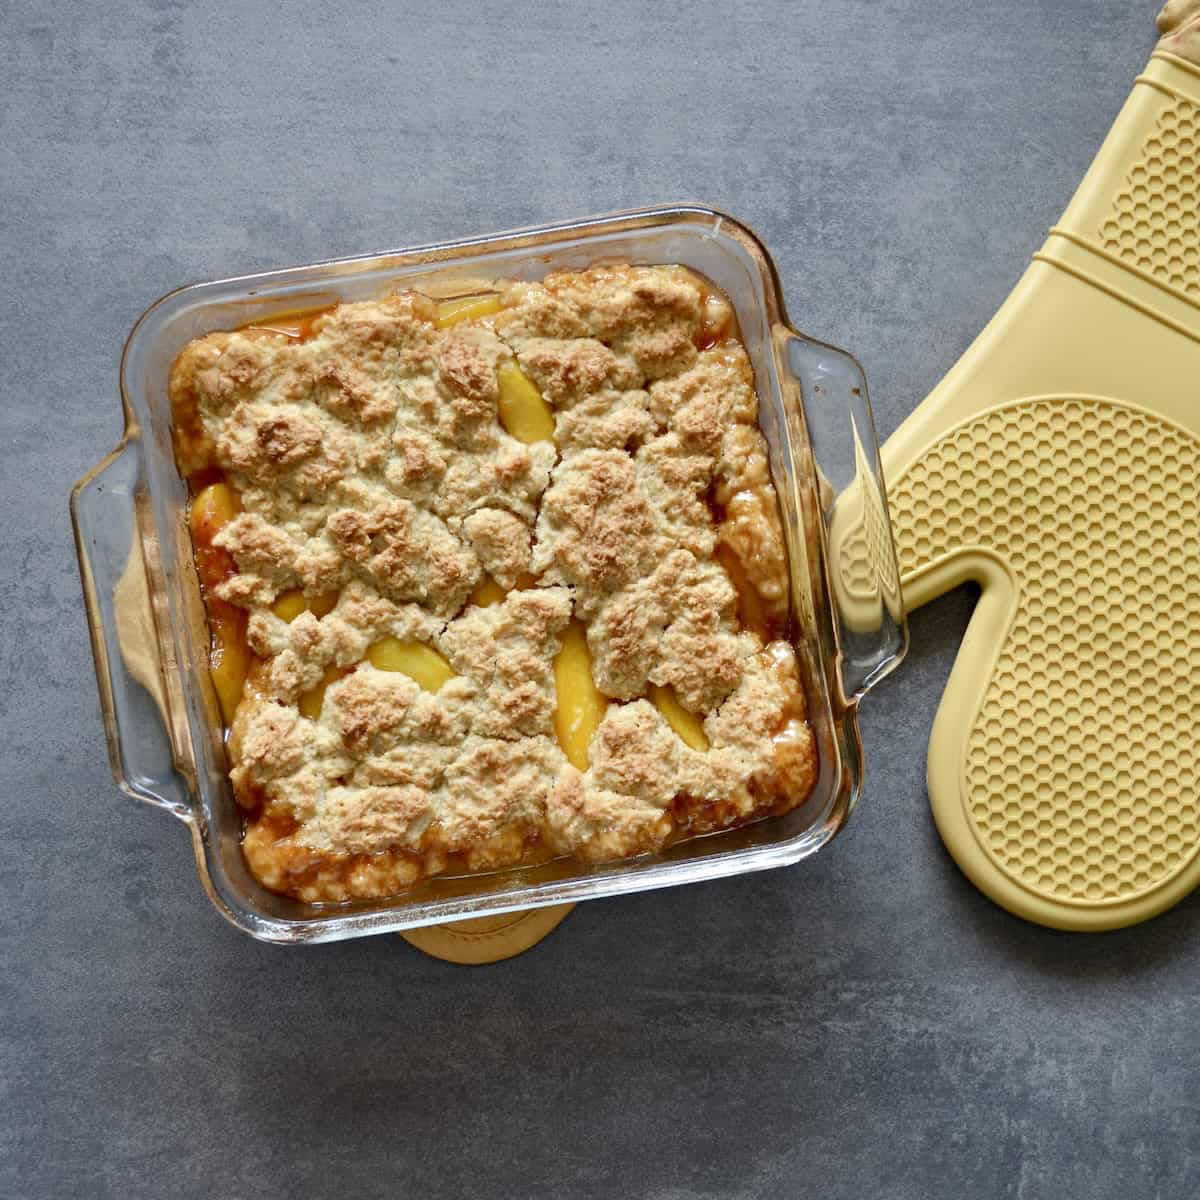 Baking dish with peach cobbler and oven mitt